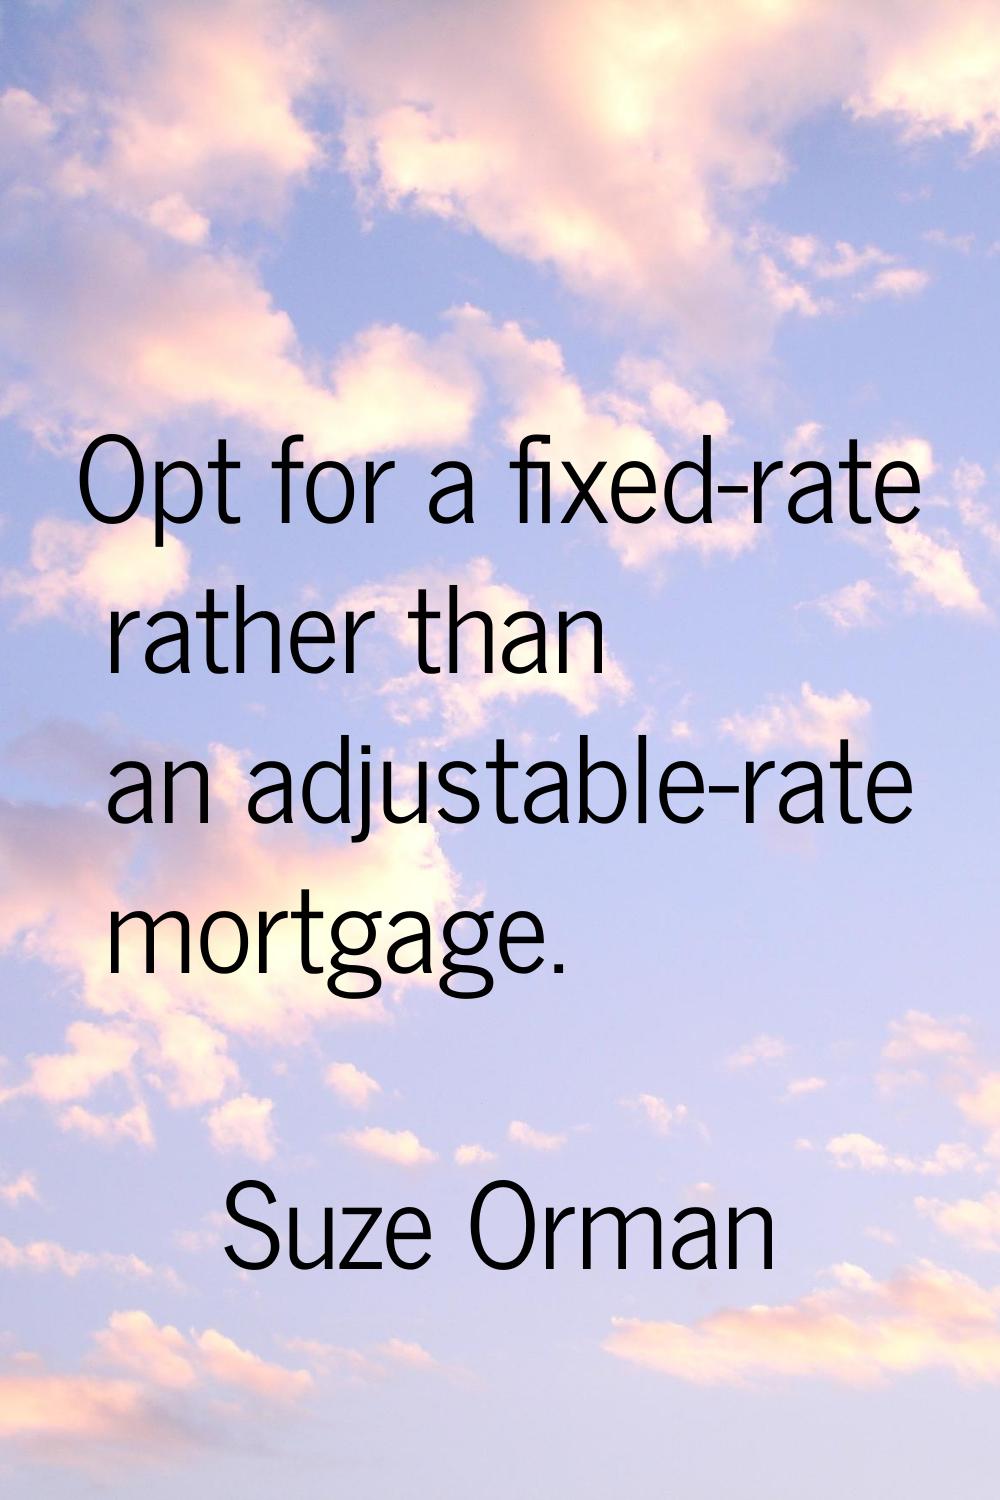 Opt for a fixed-rate rather than an adjustable-rate mortgage.